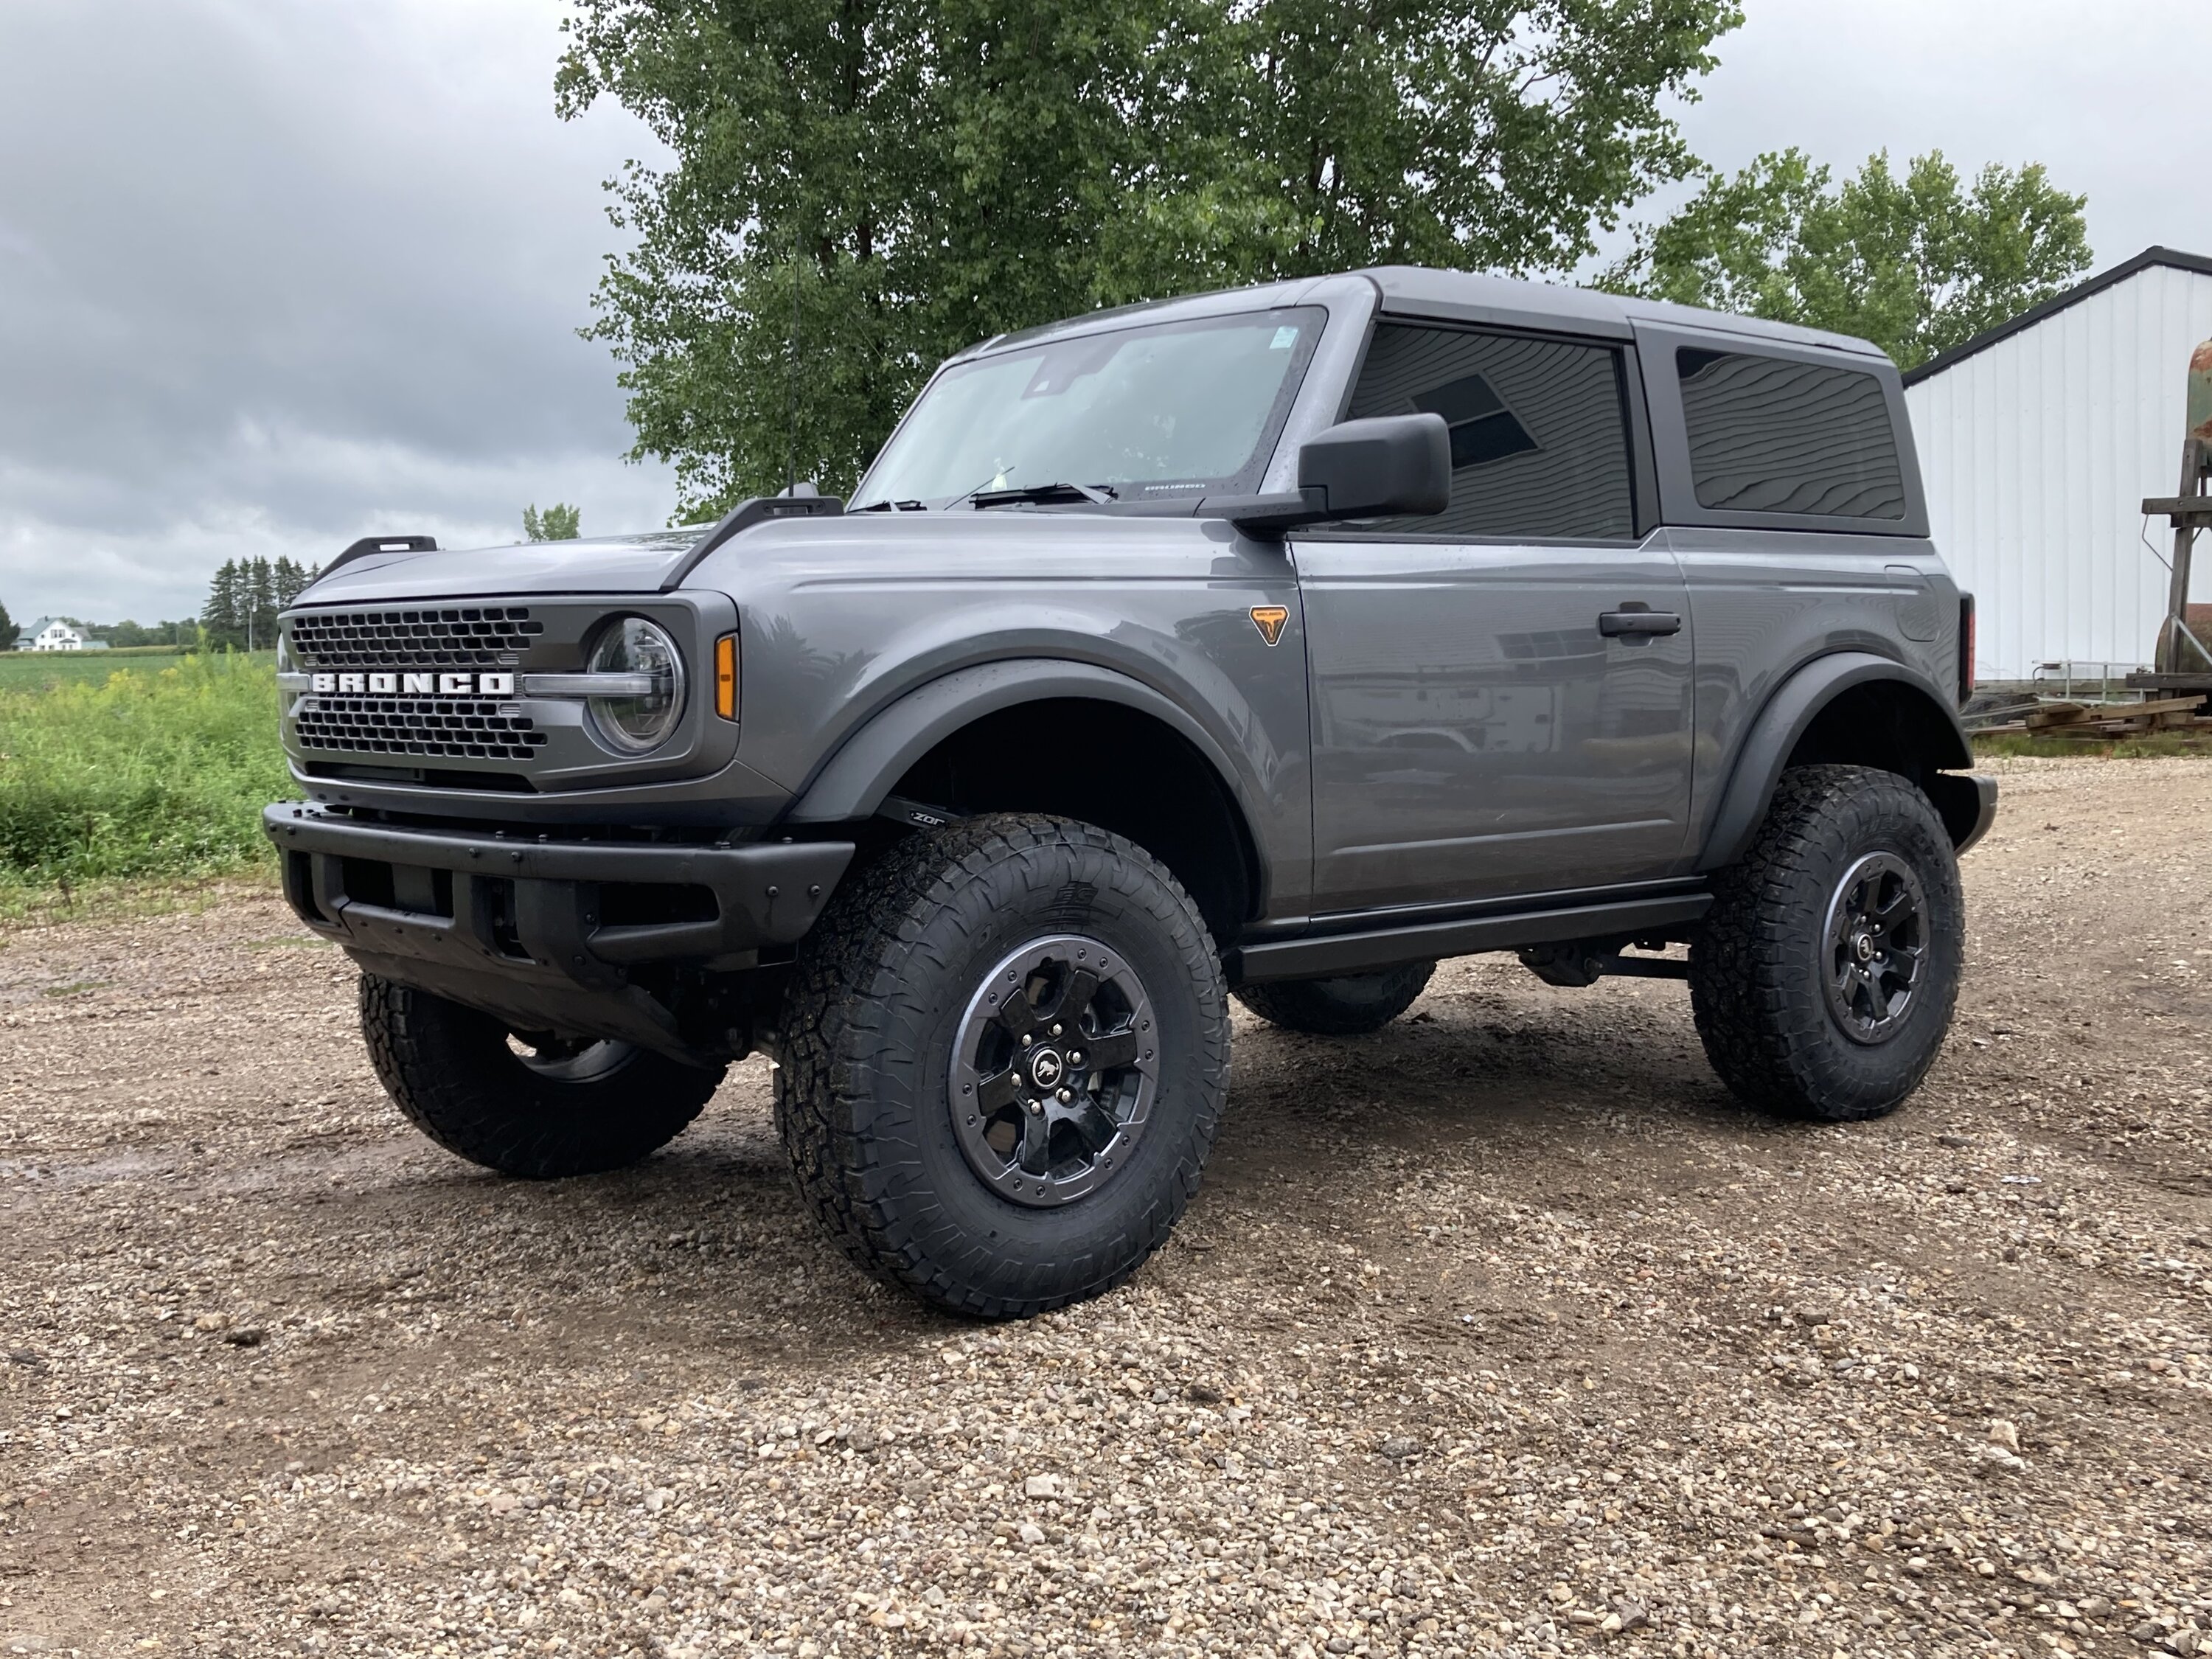 Ford Bronco Show us your installed wheel / tire upgrades here! (Pics) 77F3A76A-1681-45A5-9CA0-E950CE1BB2BB